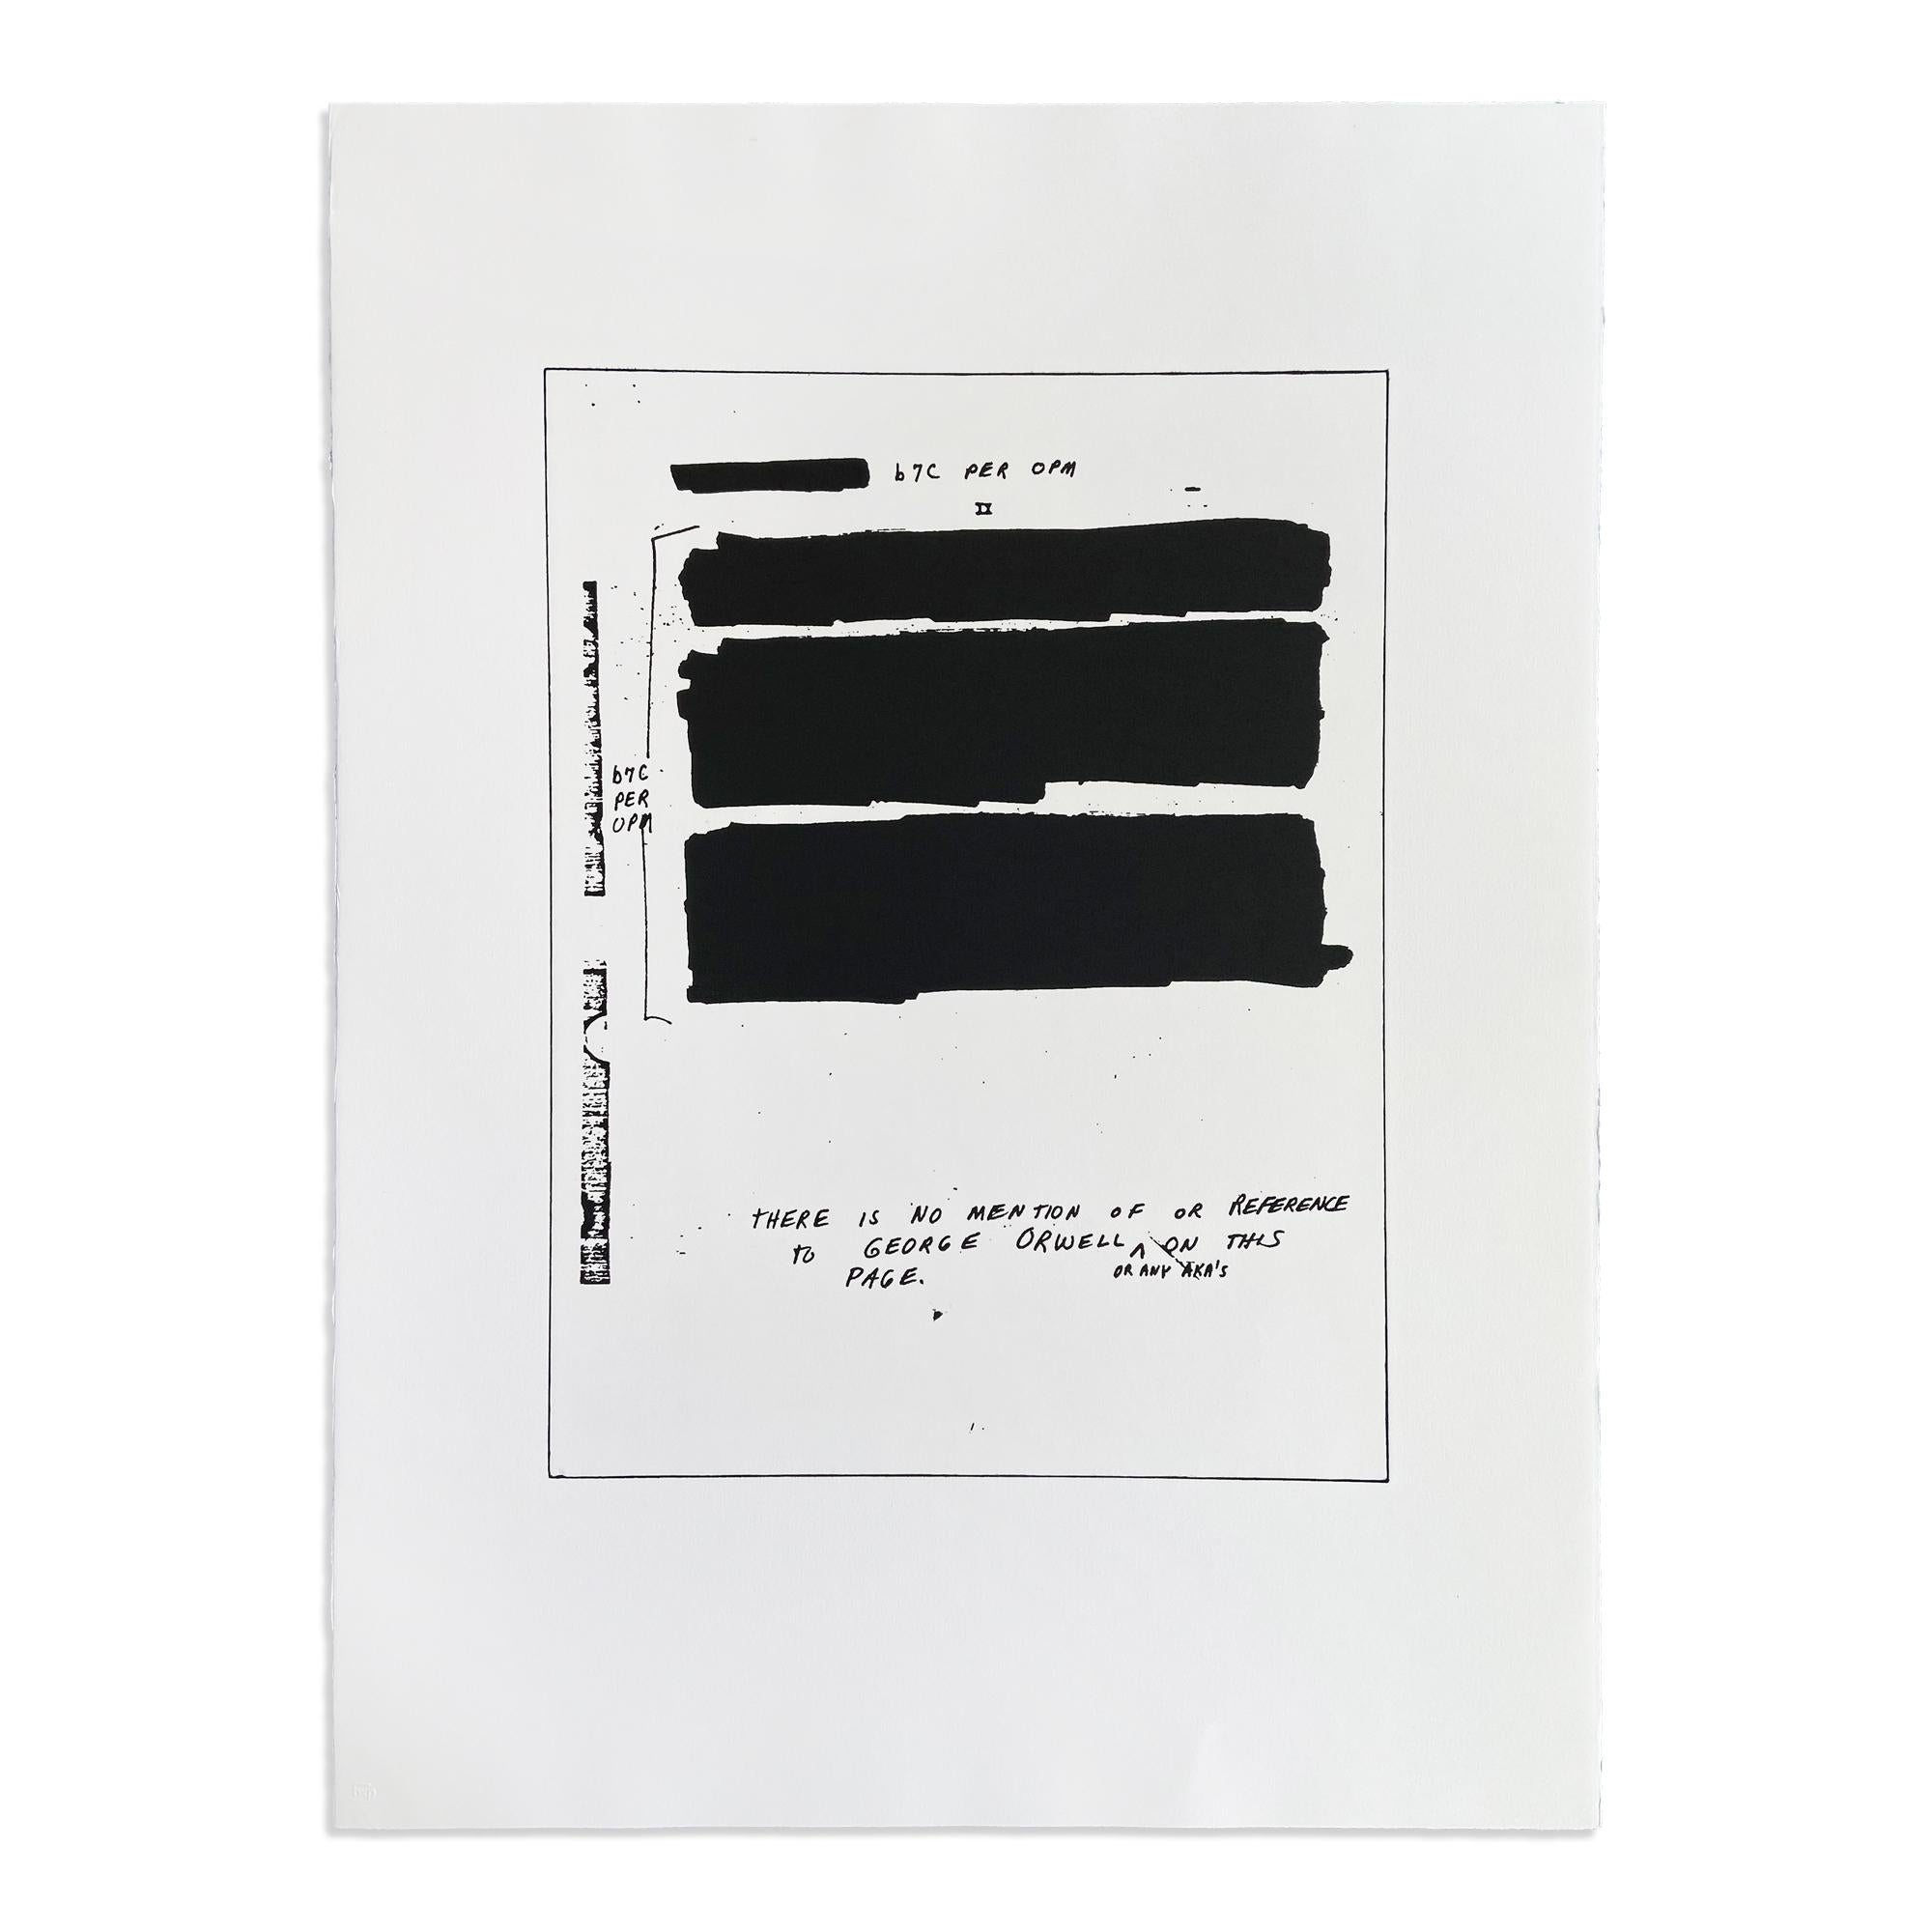 Jenny Holzer (American, b. 1950)
AKA, 2006
Medium: Set of five etchings, on Magnani Pescia paper (with title page, sheets loose, in original black silk-covered portfolio case)
Dimensions: 75.6 x 56.3 cm (29 3/4 x 22 1/8 in)
Edition of 40: